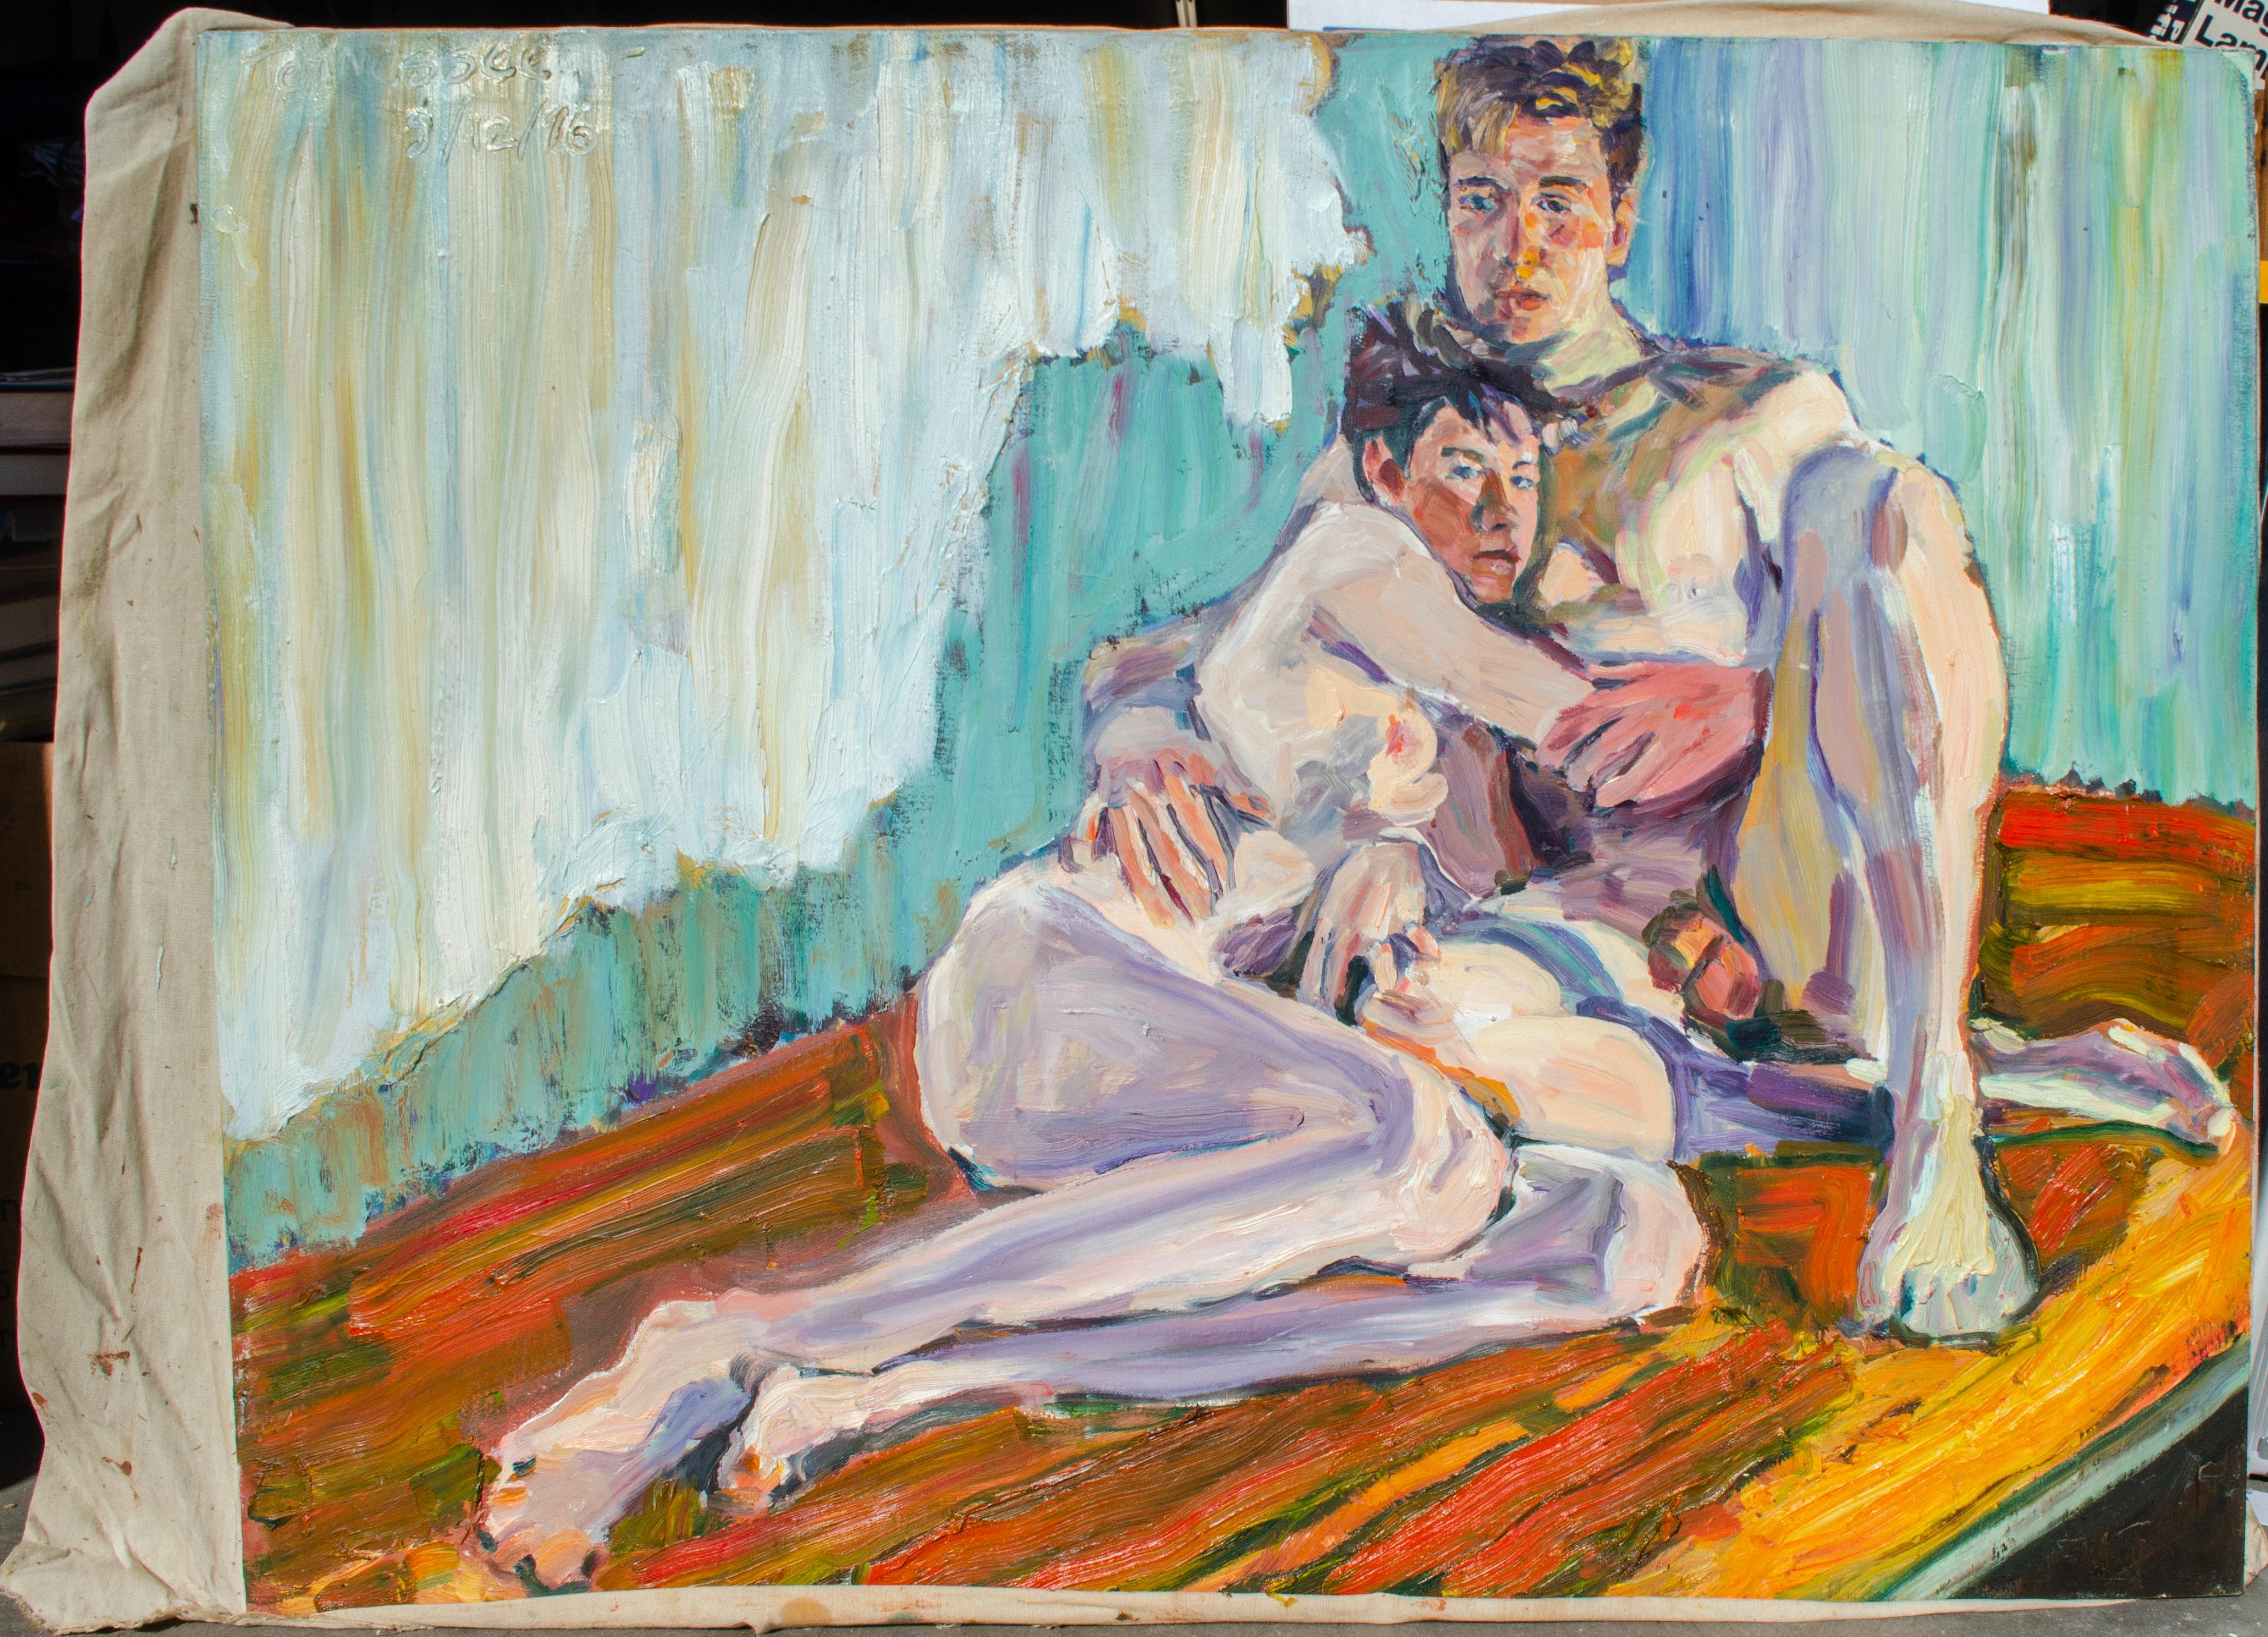 1986 Intimate Couple Portrait by Mystery Artist - Painting by Unknown